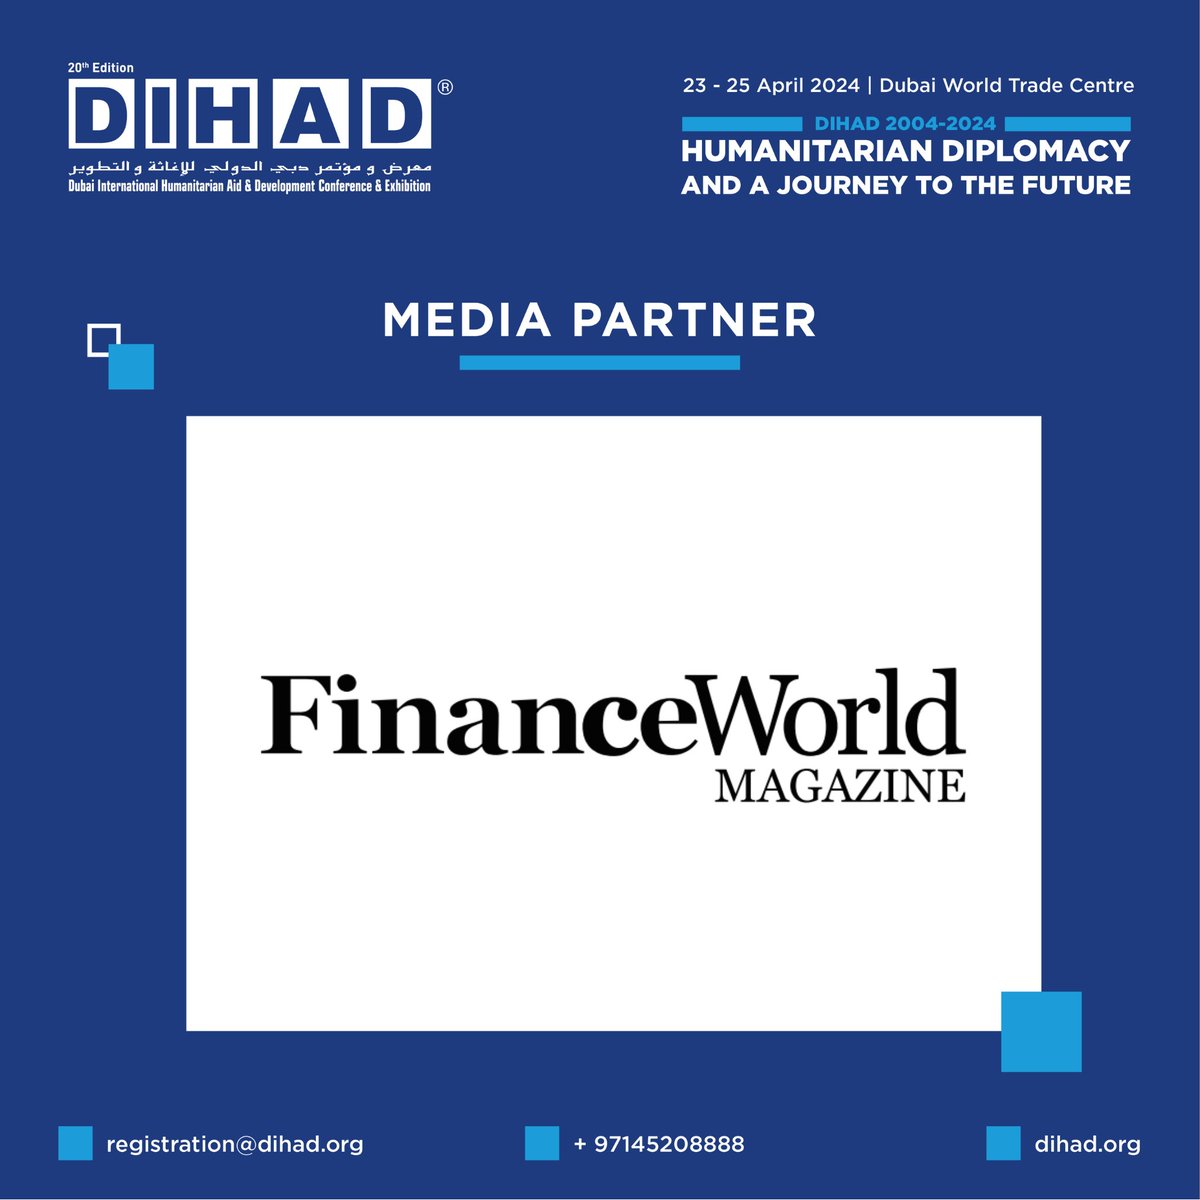 Join us at the 20th edition of the Dubai International Humanitarian Aid and Development (DIHAD) Conference & Exhibition! 

Explore the Conference Programme and be part of this transformative journey! 

#DIHAD2024 #HumanitarianAid  #financeworld #financeworldmagazine